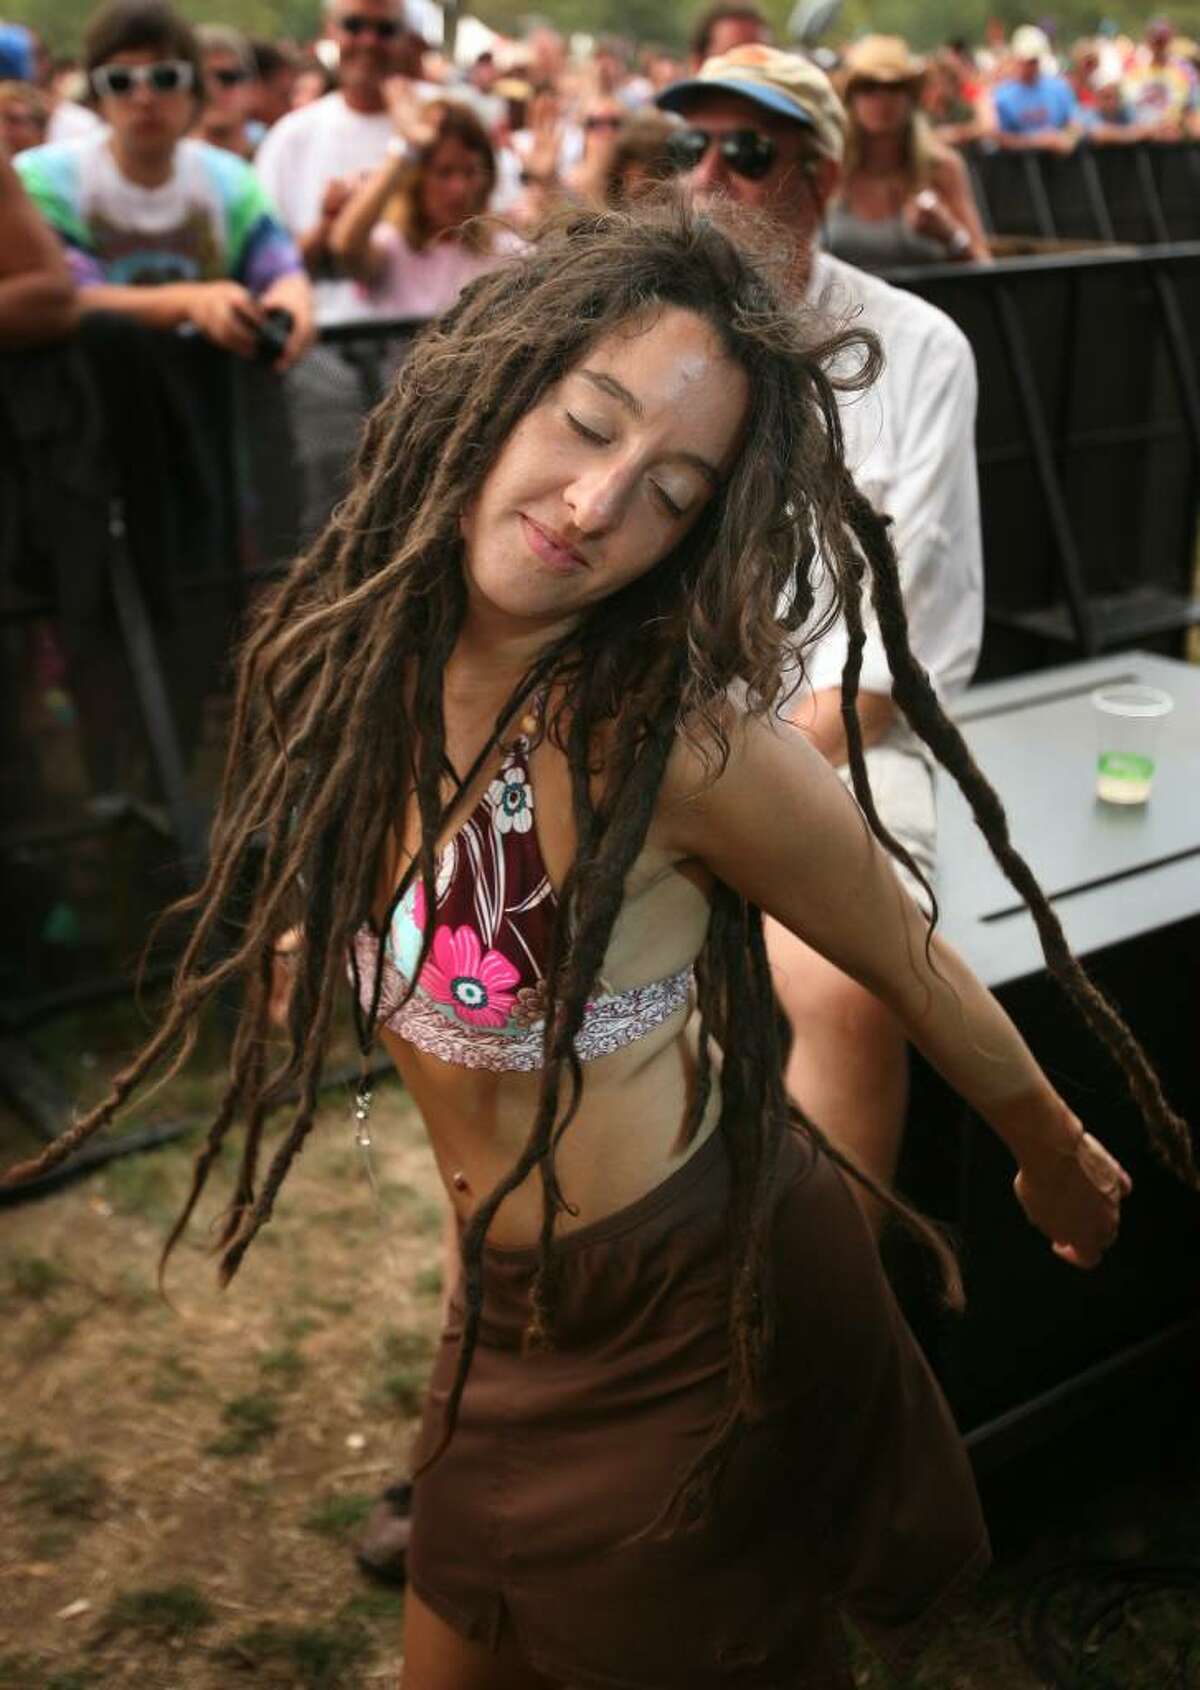 Rebecca Vandevear of San Diego, CA dances during one of the sets at the Gathering of the Vibes music festival at Seaside Park in Bridgeport on Sunday, August 1, 2010.